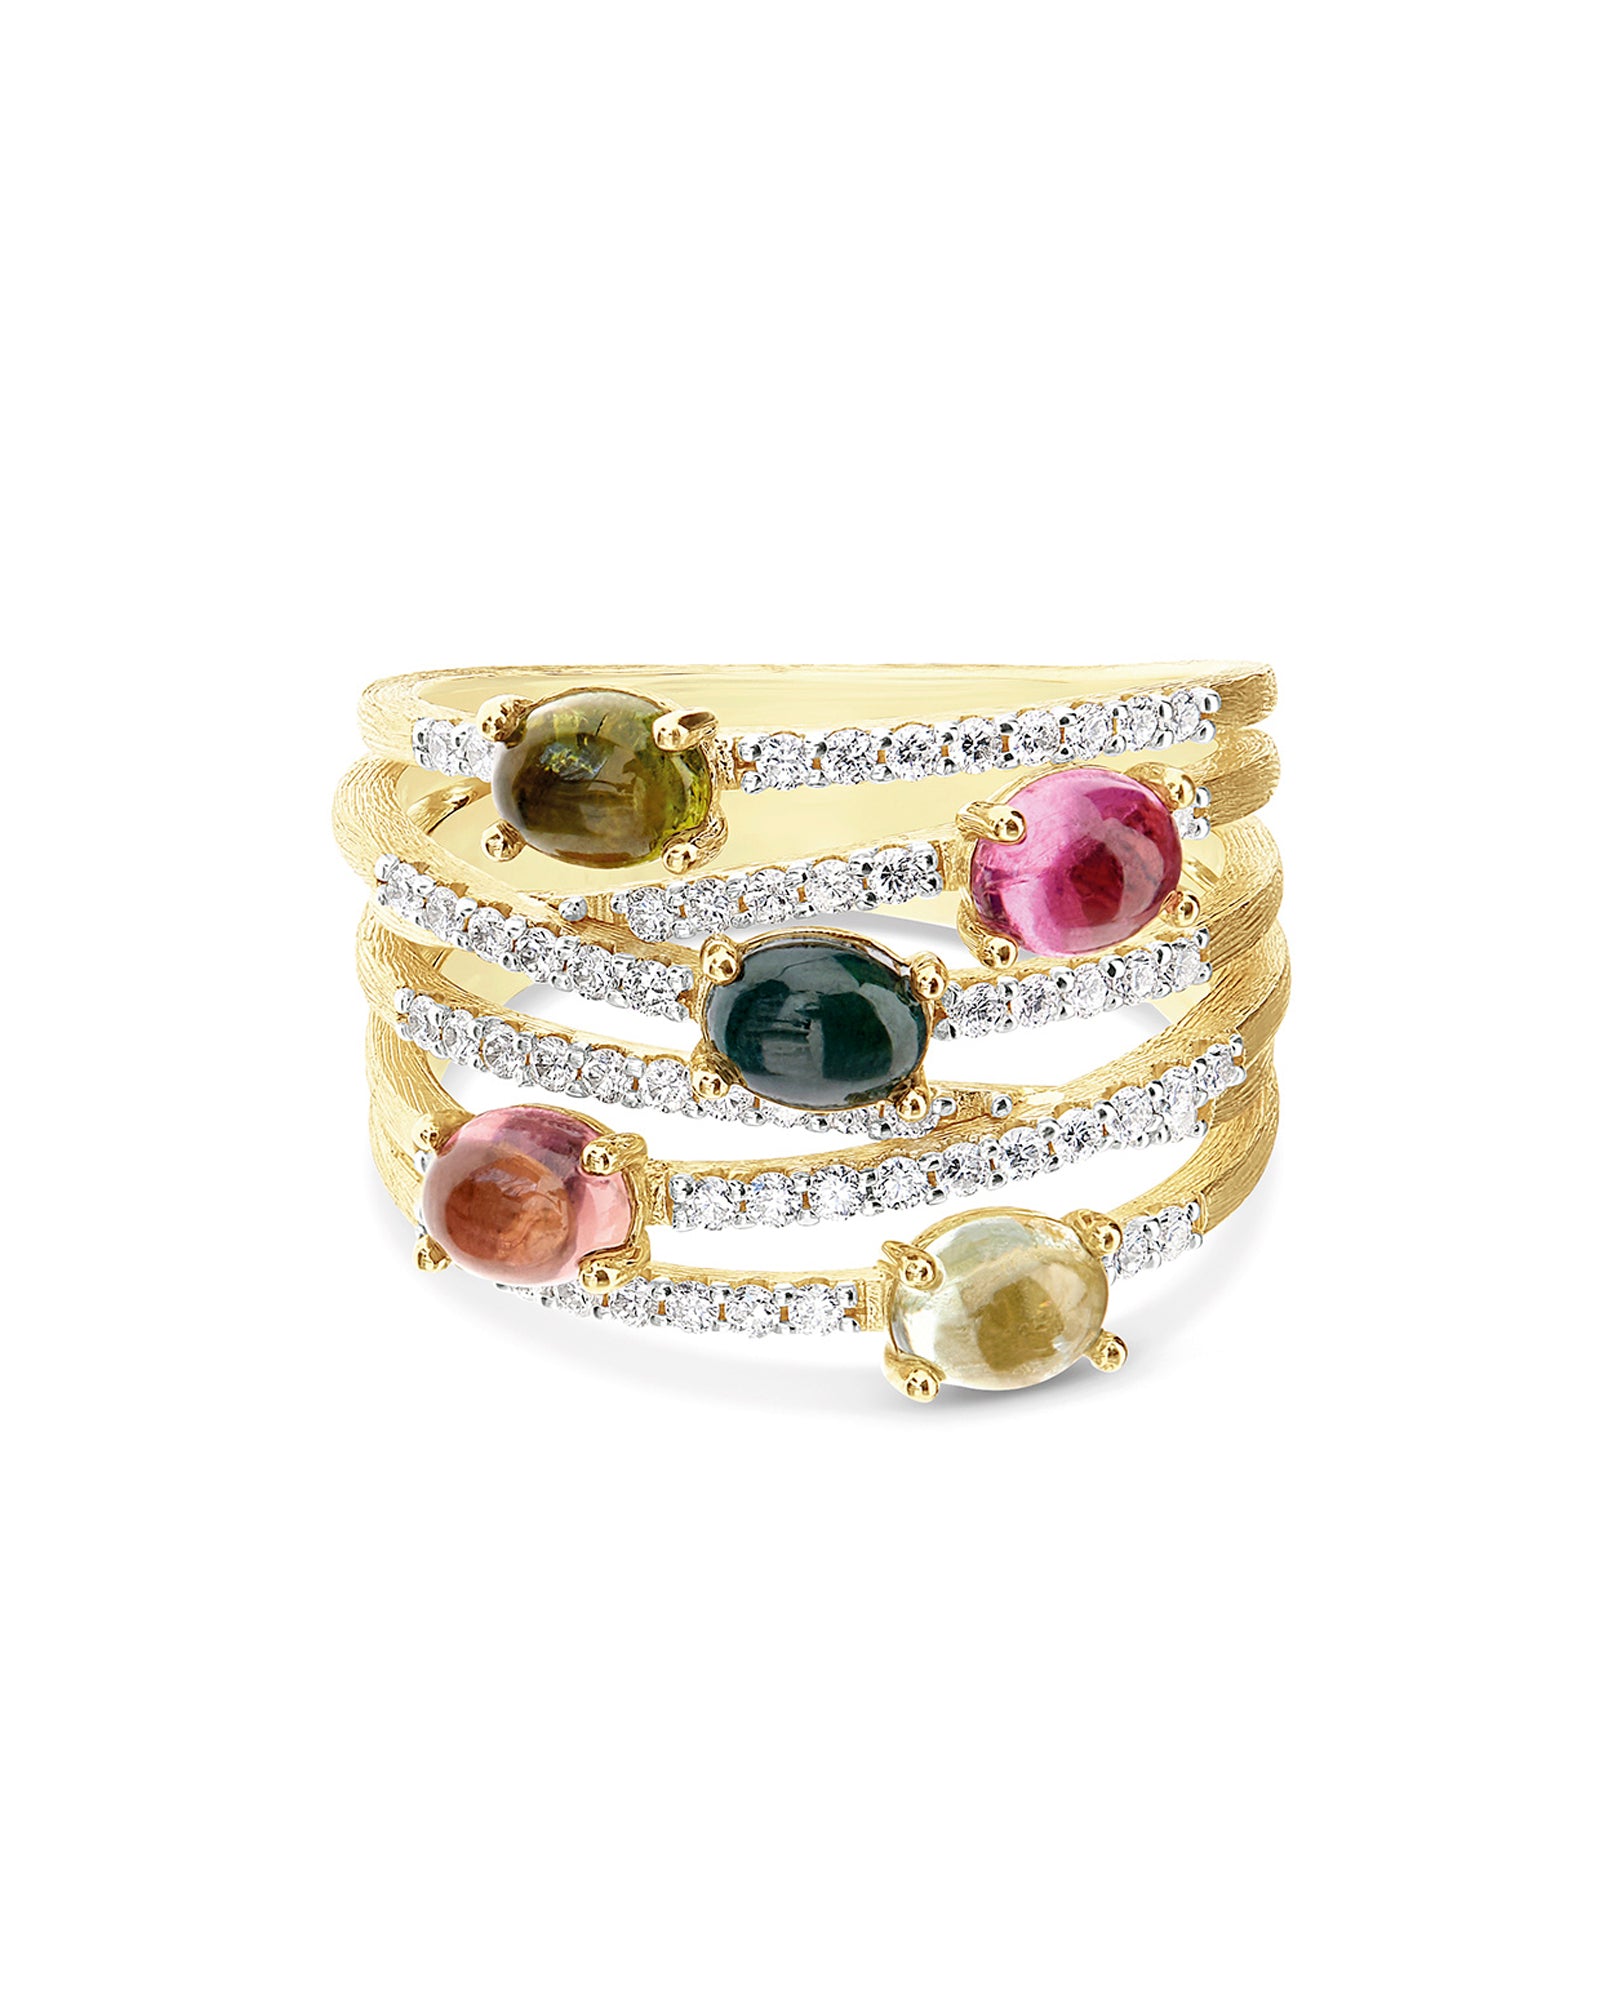 "tourmalines" gold and tourmaline colorful ring